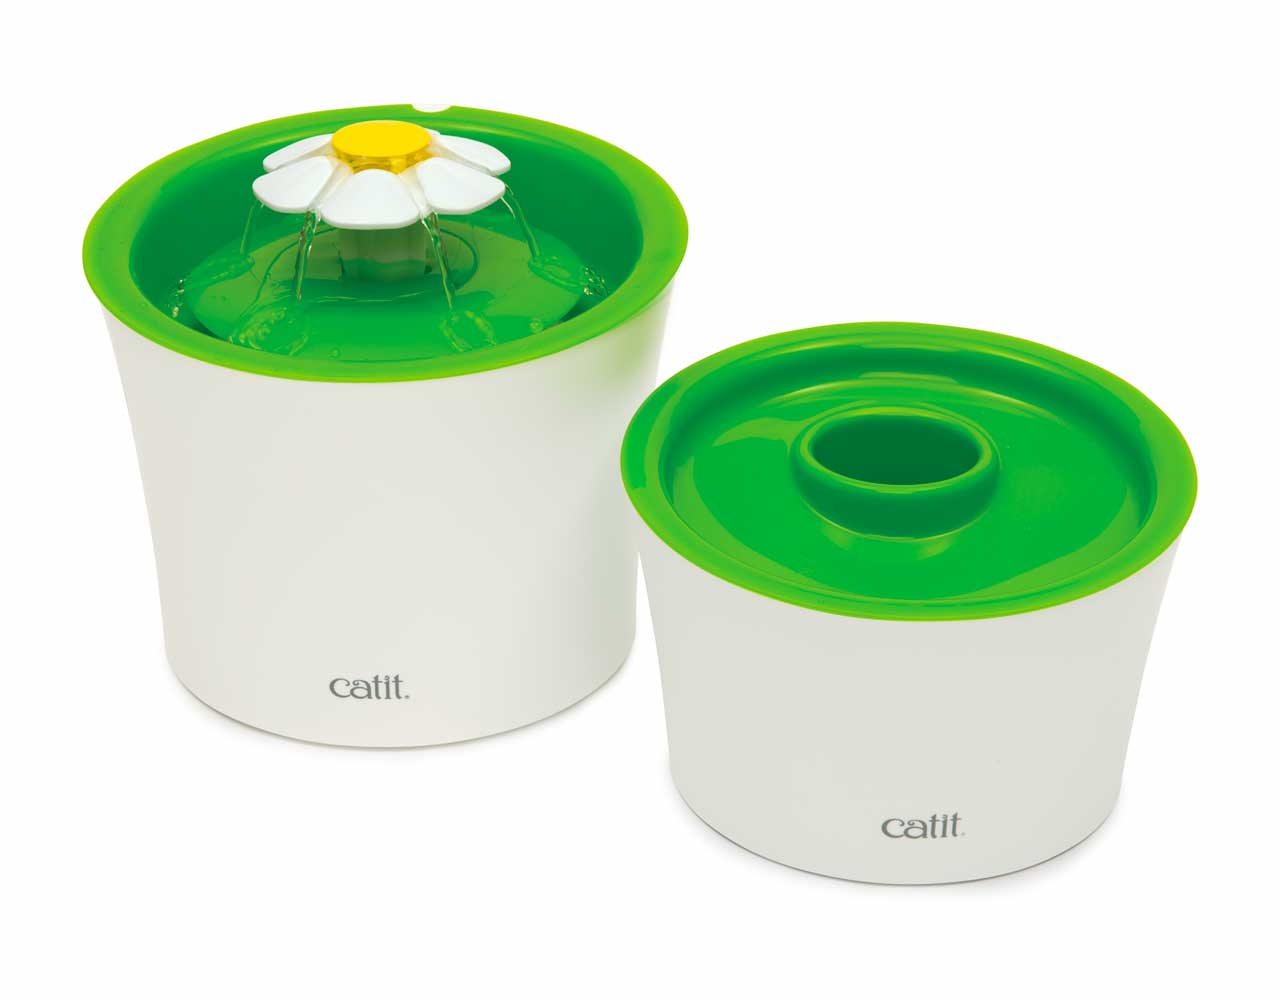 Catit Multi Feeder & Catit Flower Fountain are great together